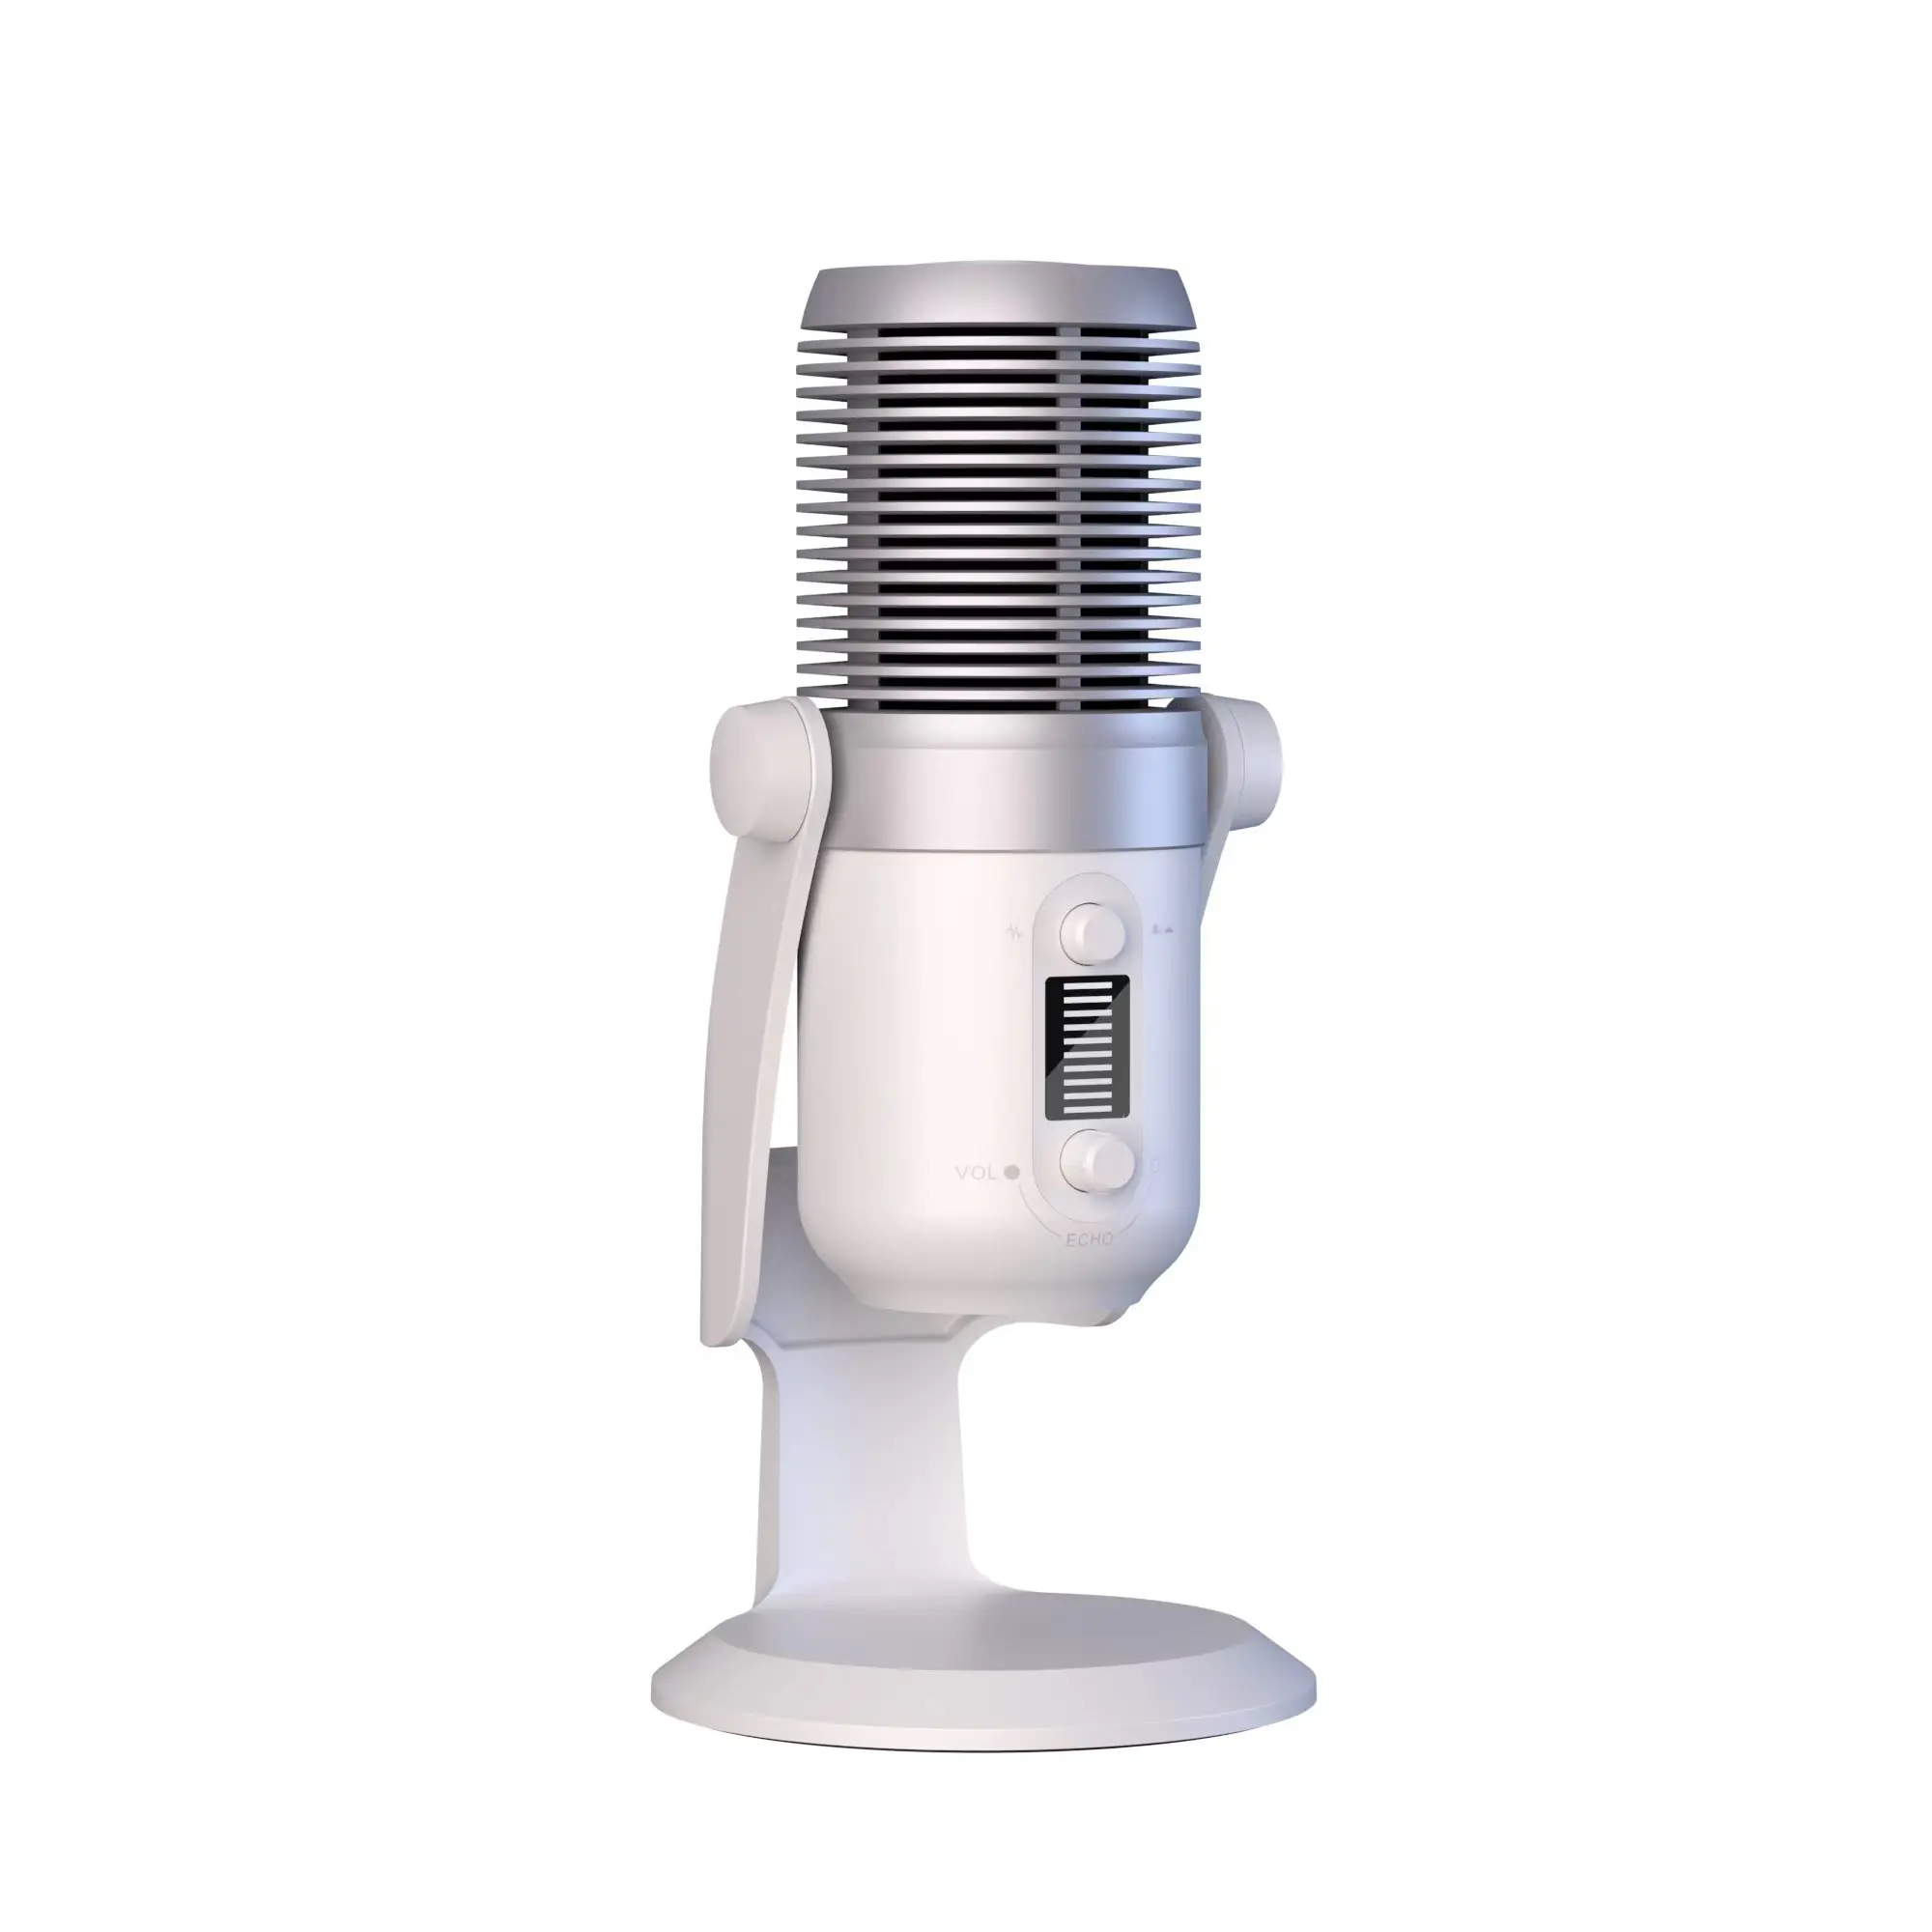 All aluminum Condenser Microphone USB Desktop Podcast Microphone Professional RGB Gaming Microphone